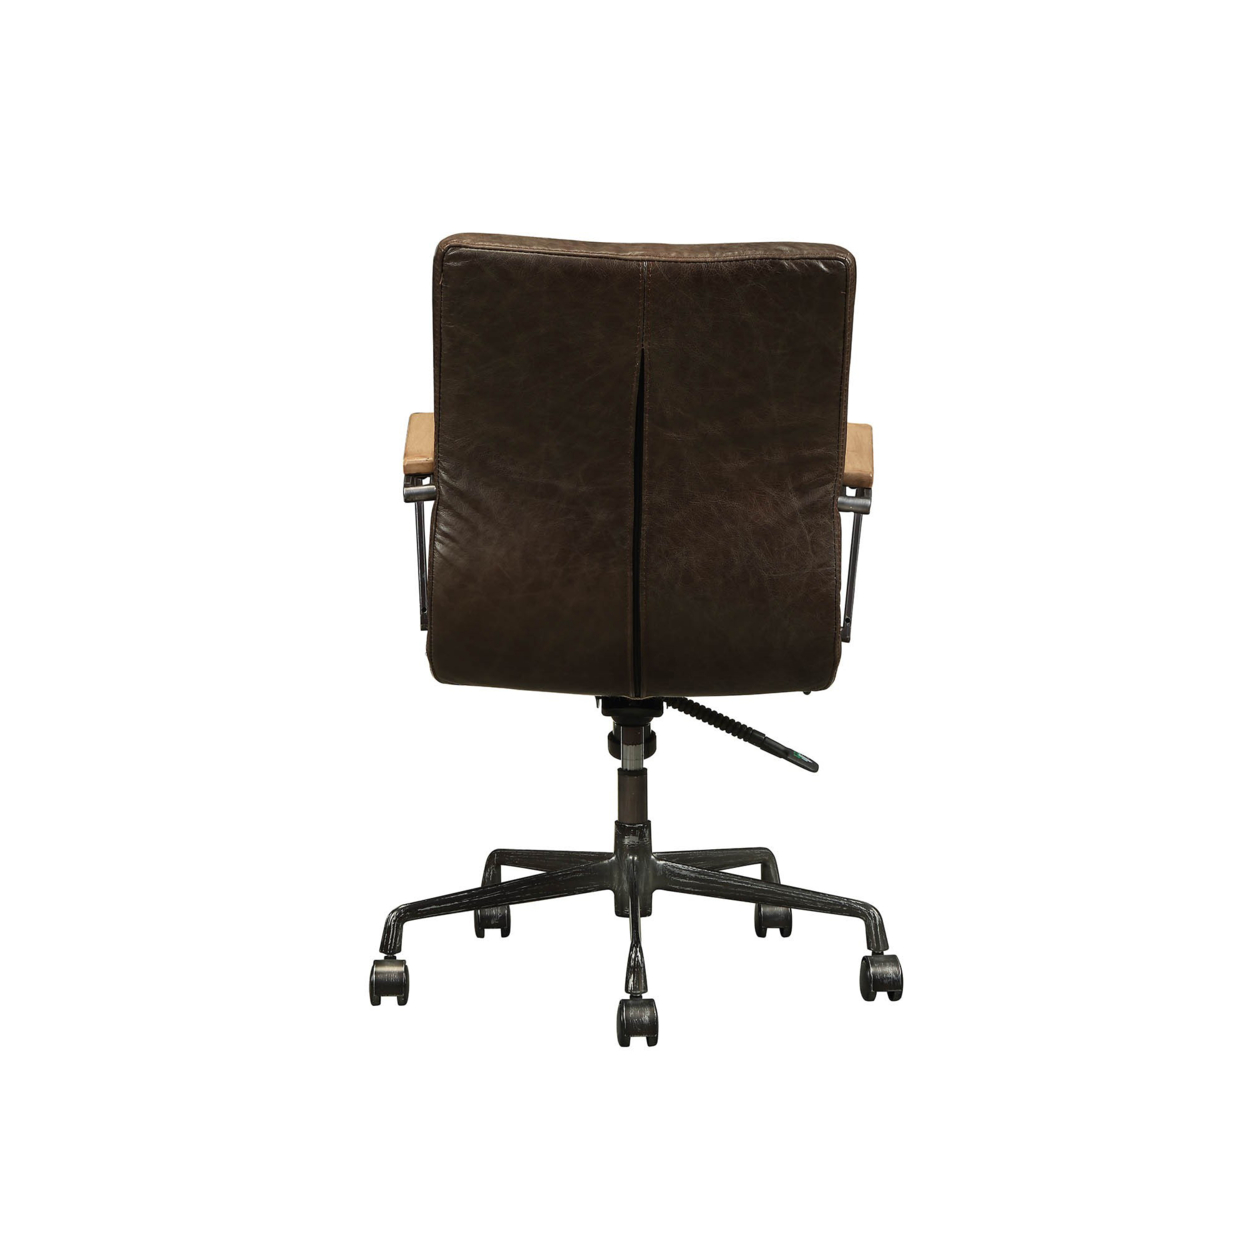 Leatherette Upholstered Metal Swivel Executive Chair With Curved Wooden Armrest, Brown And Black- Saltoro Sherpi